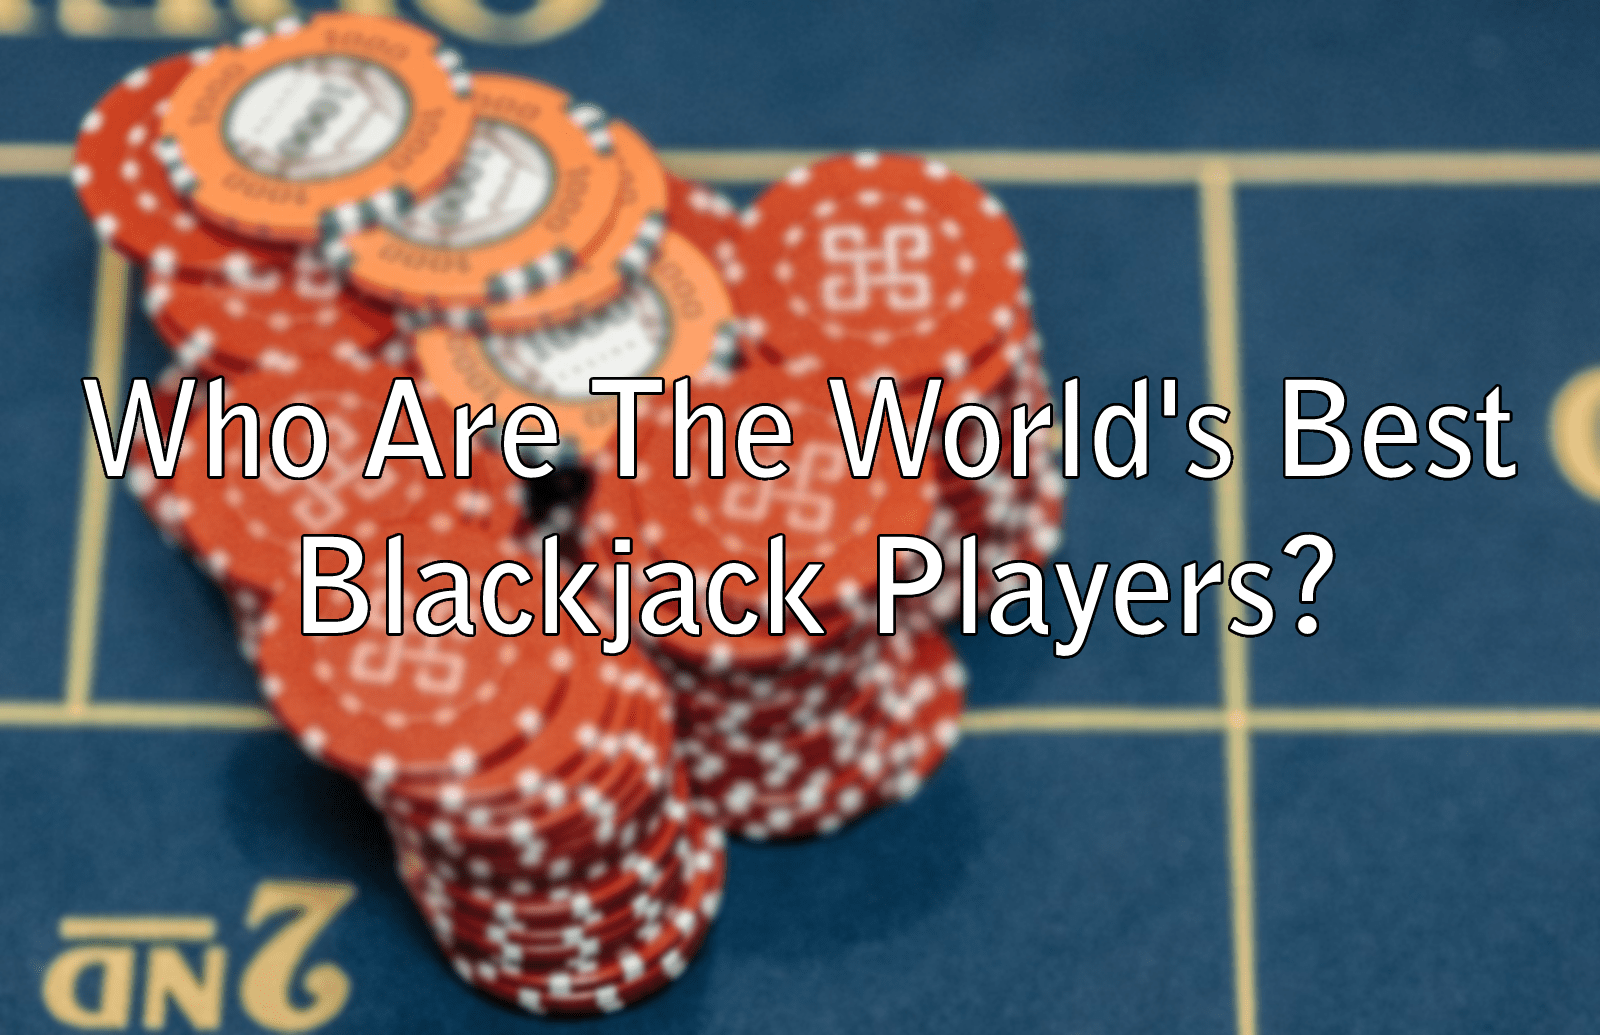 Who Are The World's Best Blackjack Players?